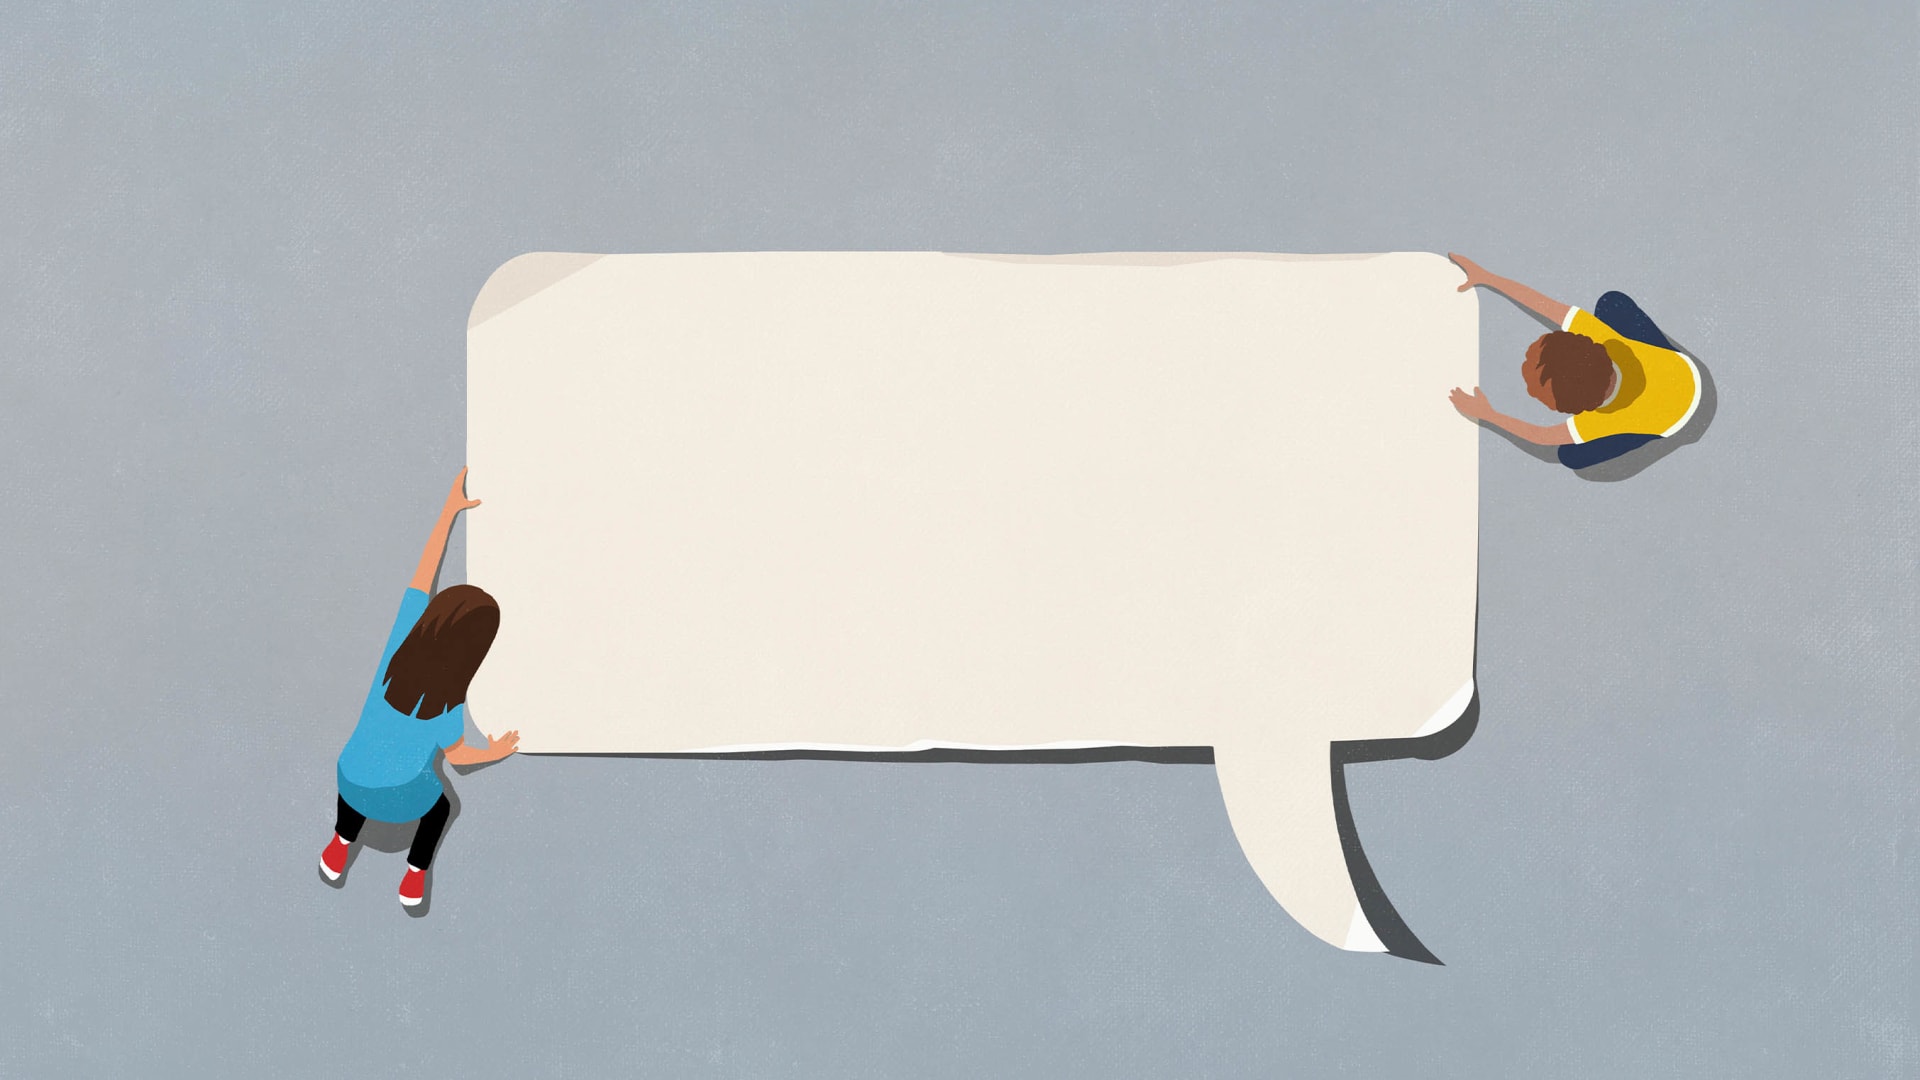 3 Common Words That Derail Difficult Conversations